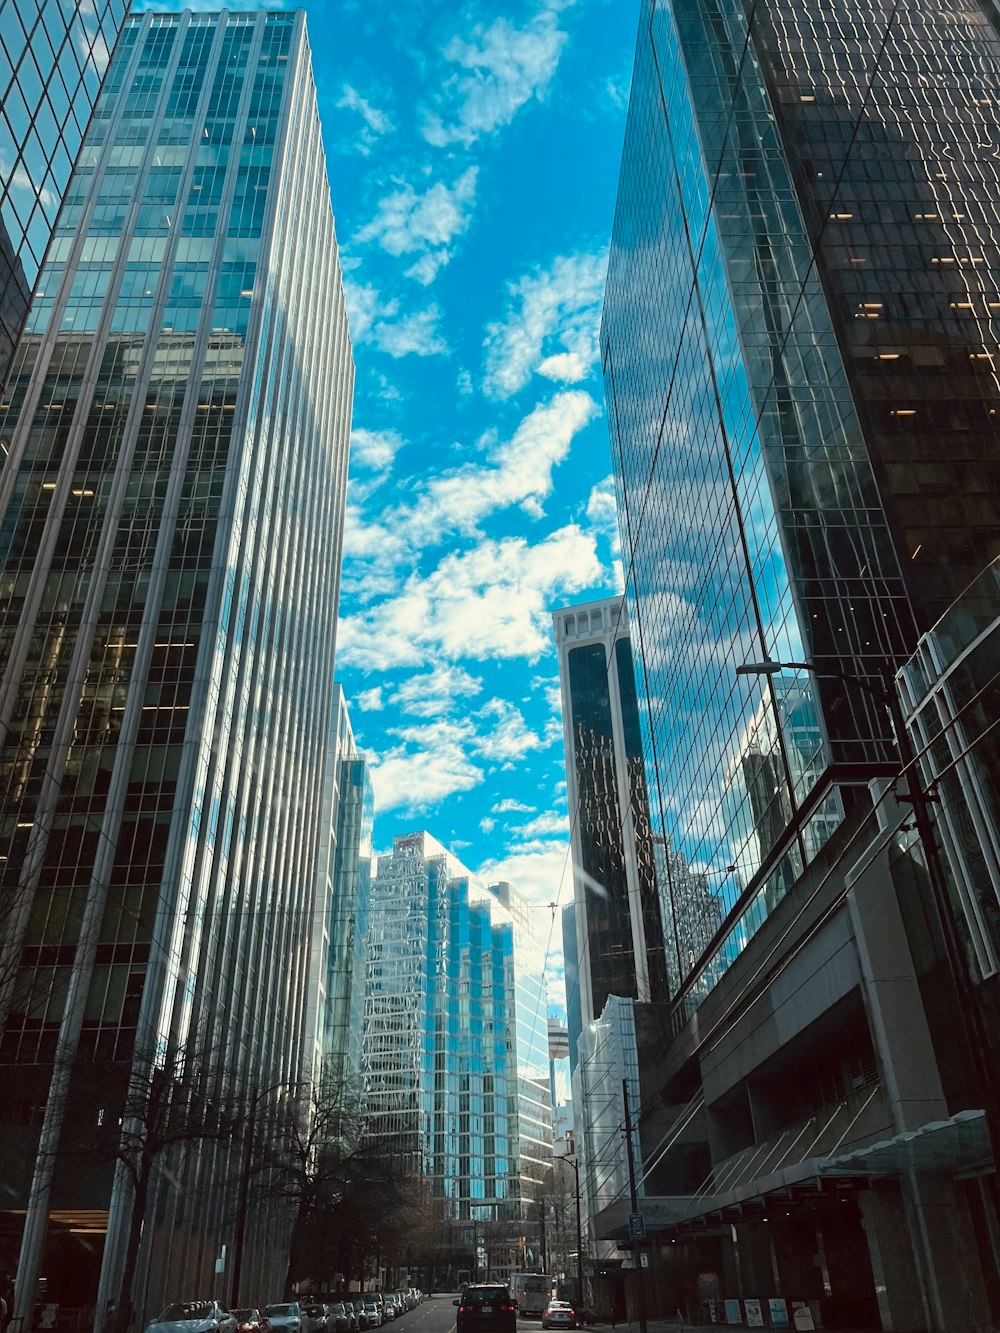 a city street lined with tall buildings under a cloudy blue sky